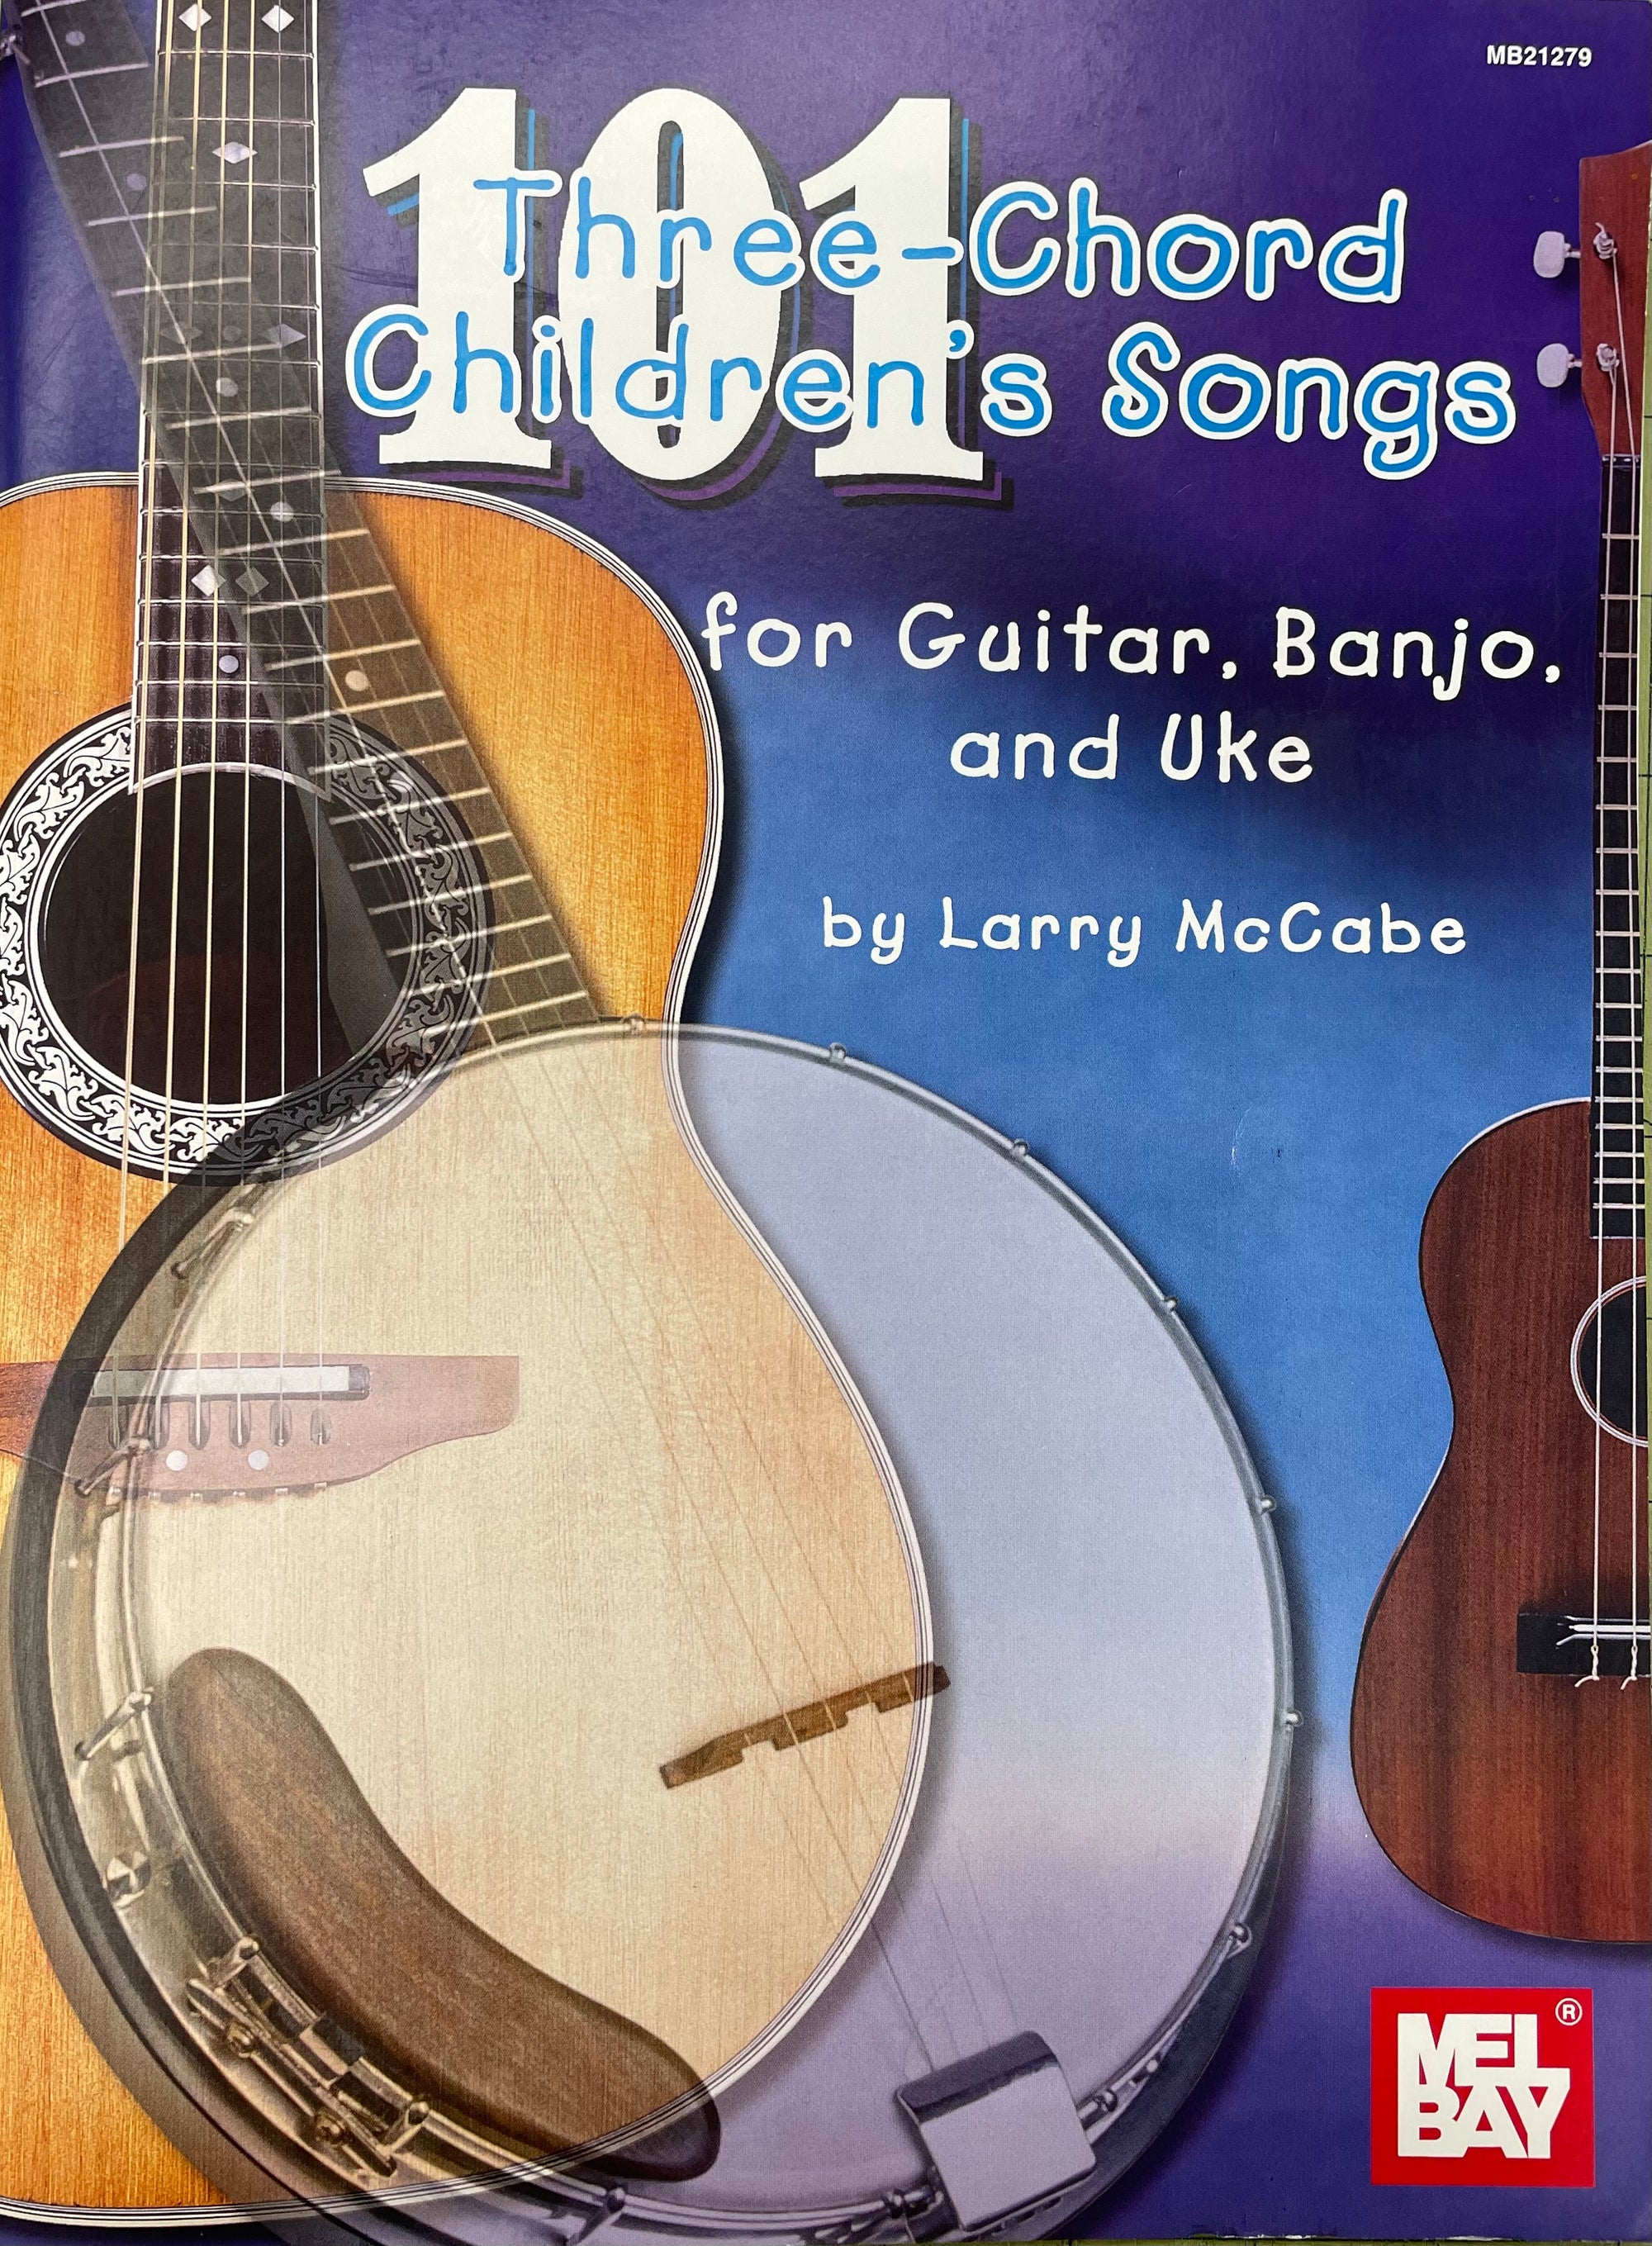 Music book titled "101 Three-Chord Children's Songs for Guitar, Banjo, and Uke" by Larry McCabe, displayed with images of the instruments and chord diagrams on the cover.